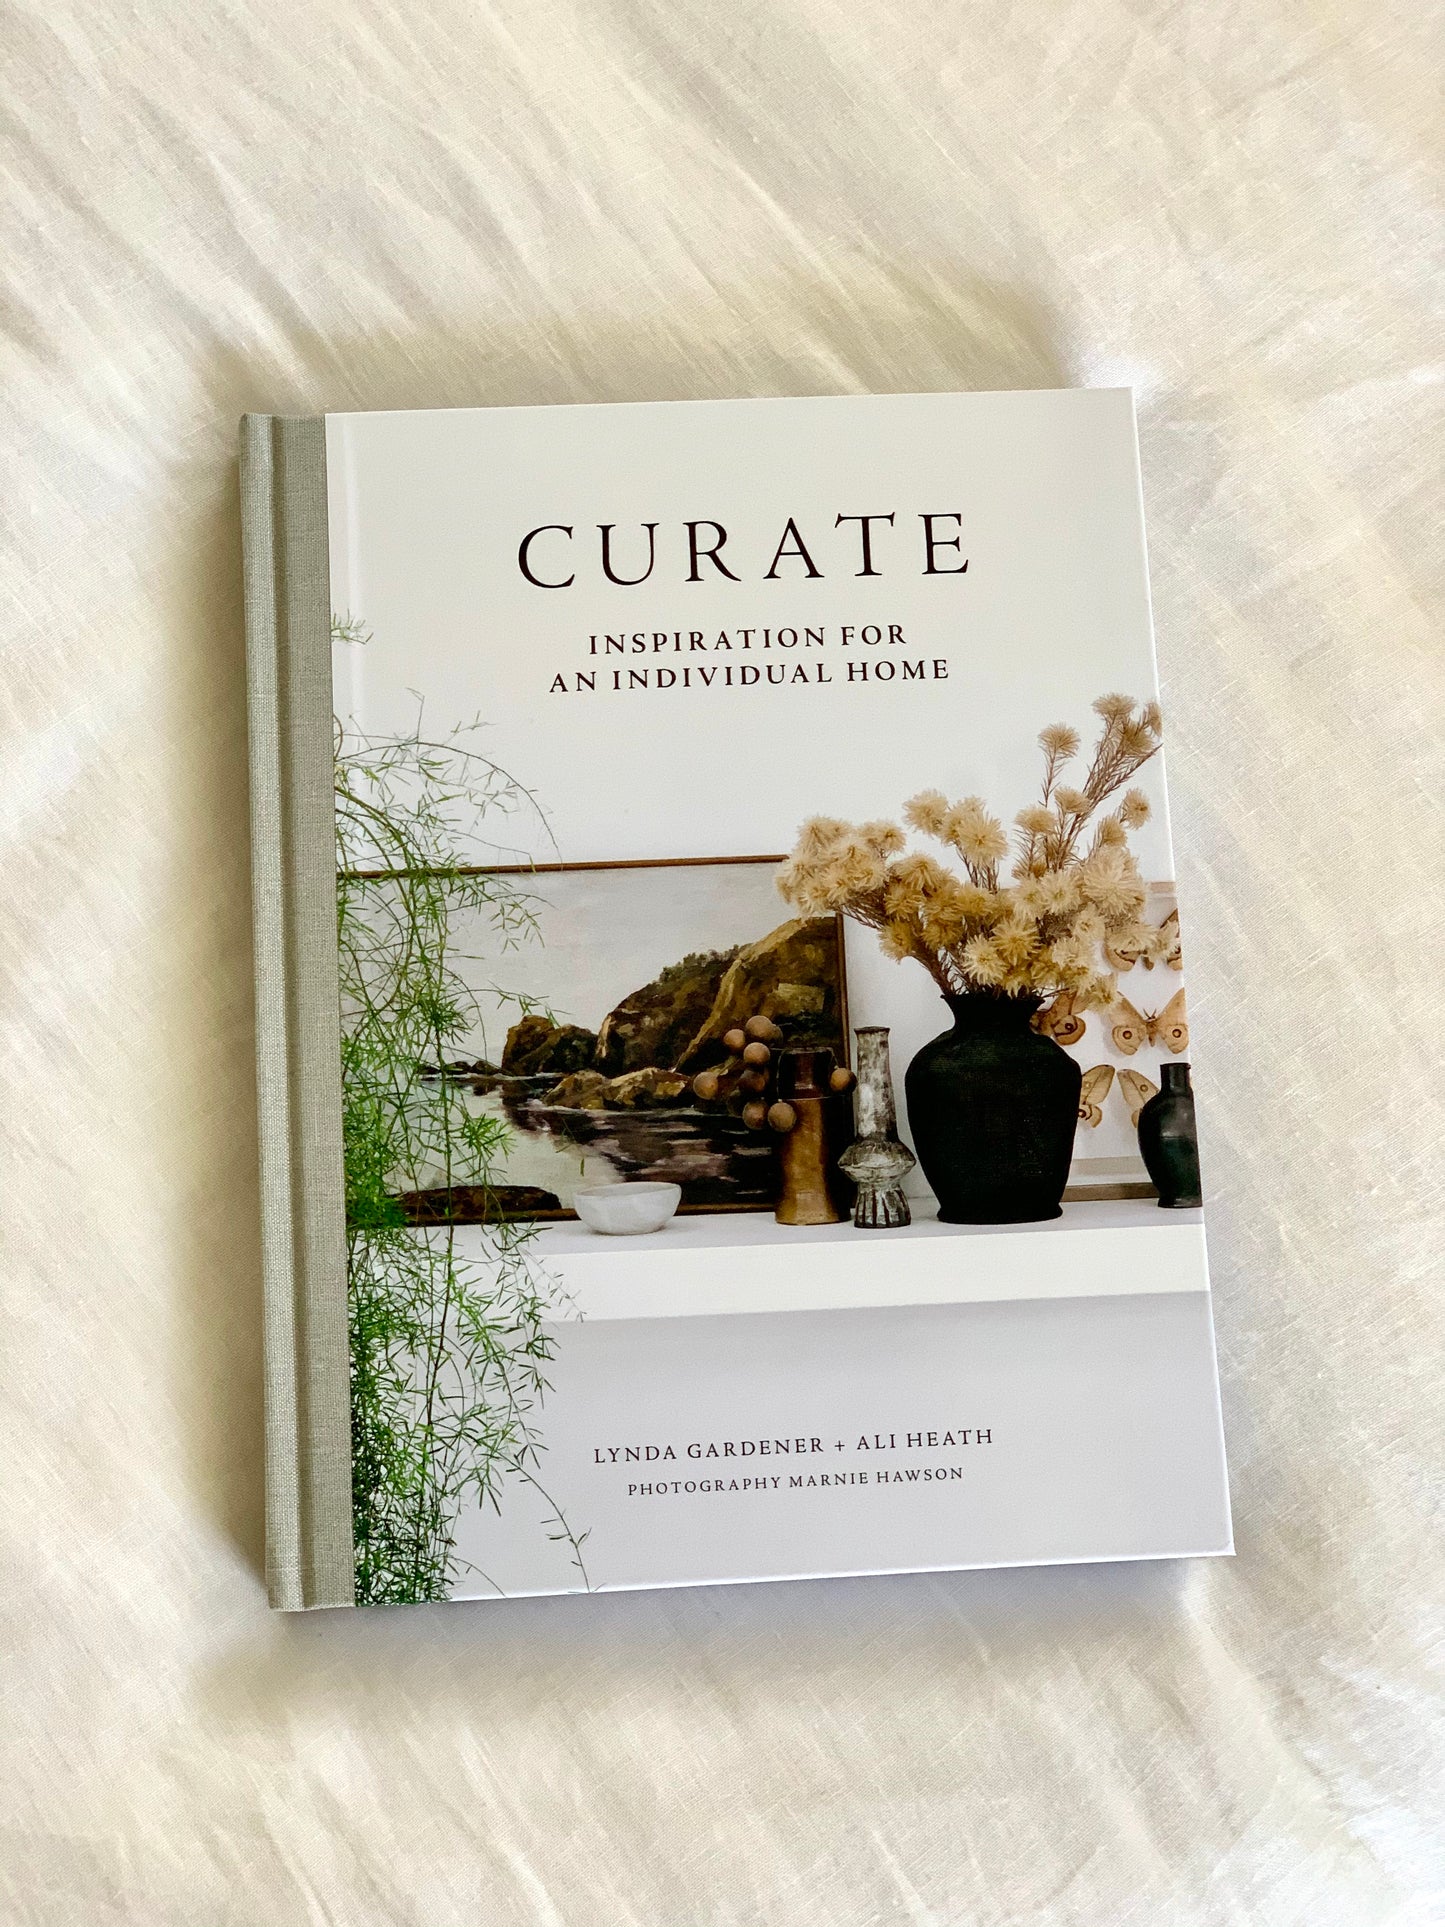 Curate ~ Inspiration for an Individual Home